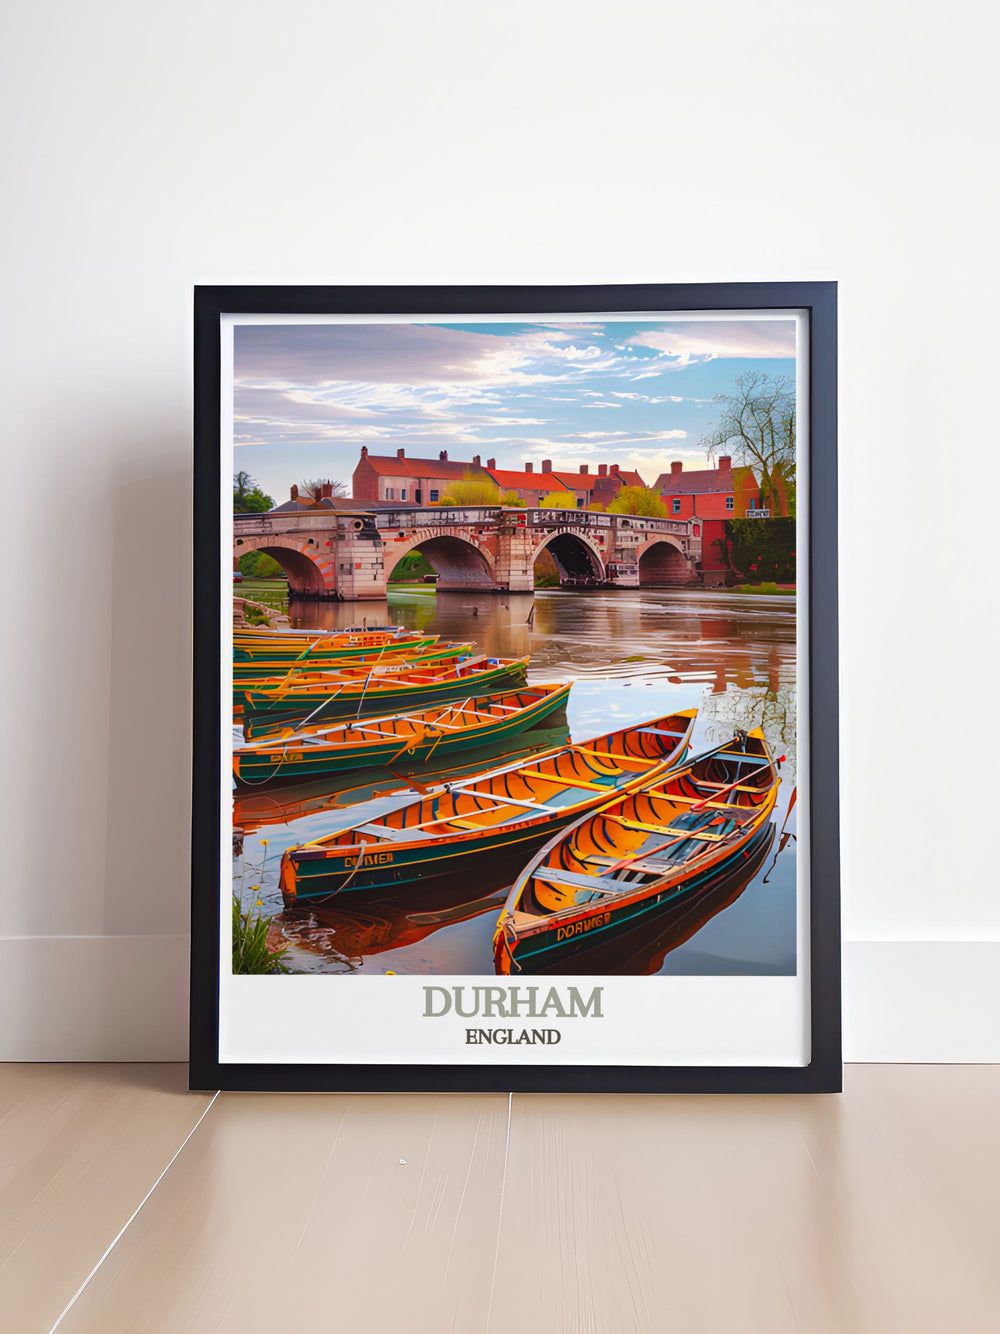 Featuring the River Wear, this art print highlights the peaceful flow and natural beauty of one of Durhams most iconic landmarks, making it ideal for nature enthusiasts and art lovers alike.